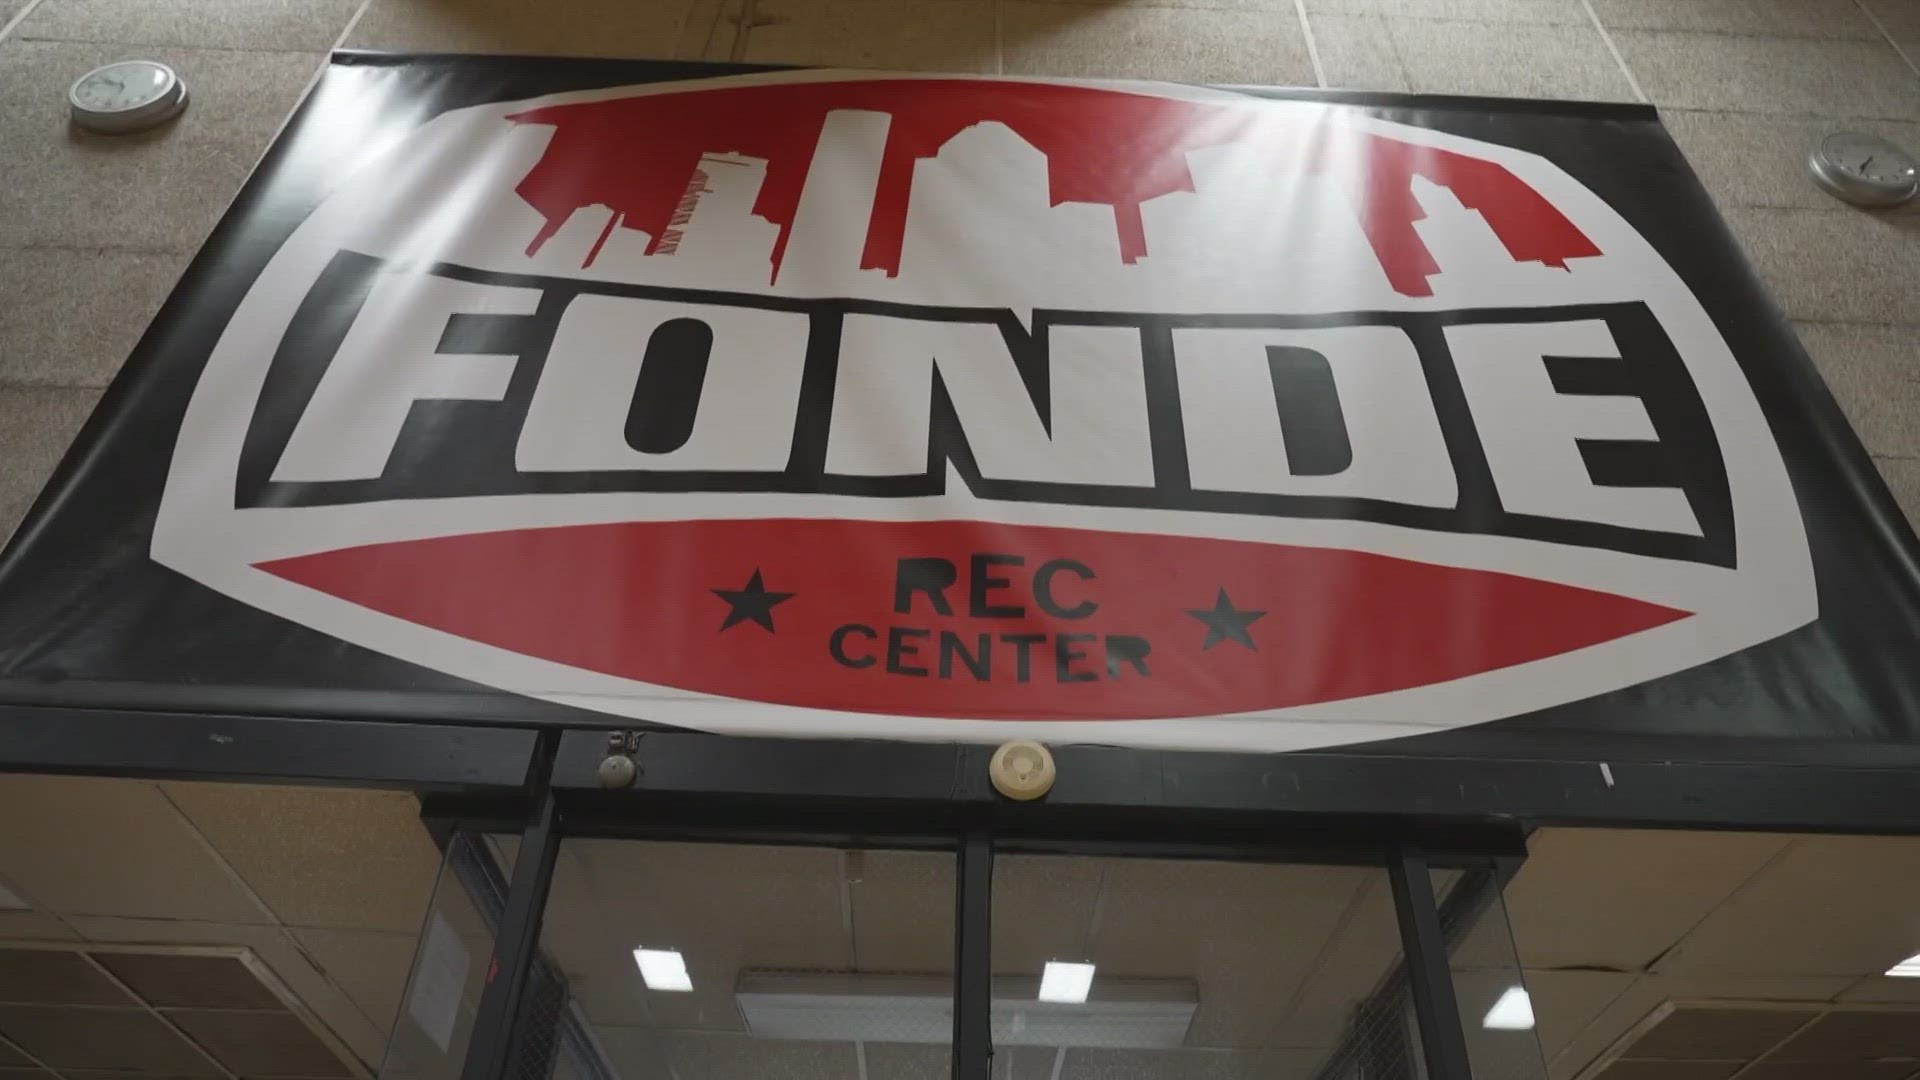 A Houston rec center has played a big role in the development of several NBA legends.